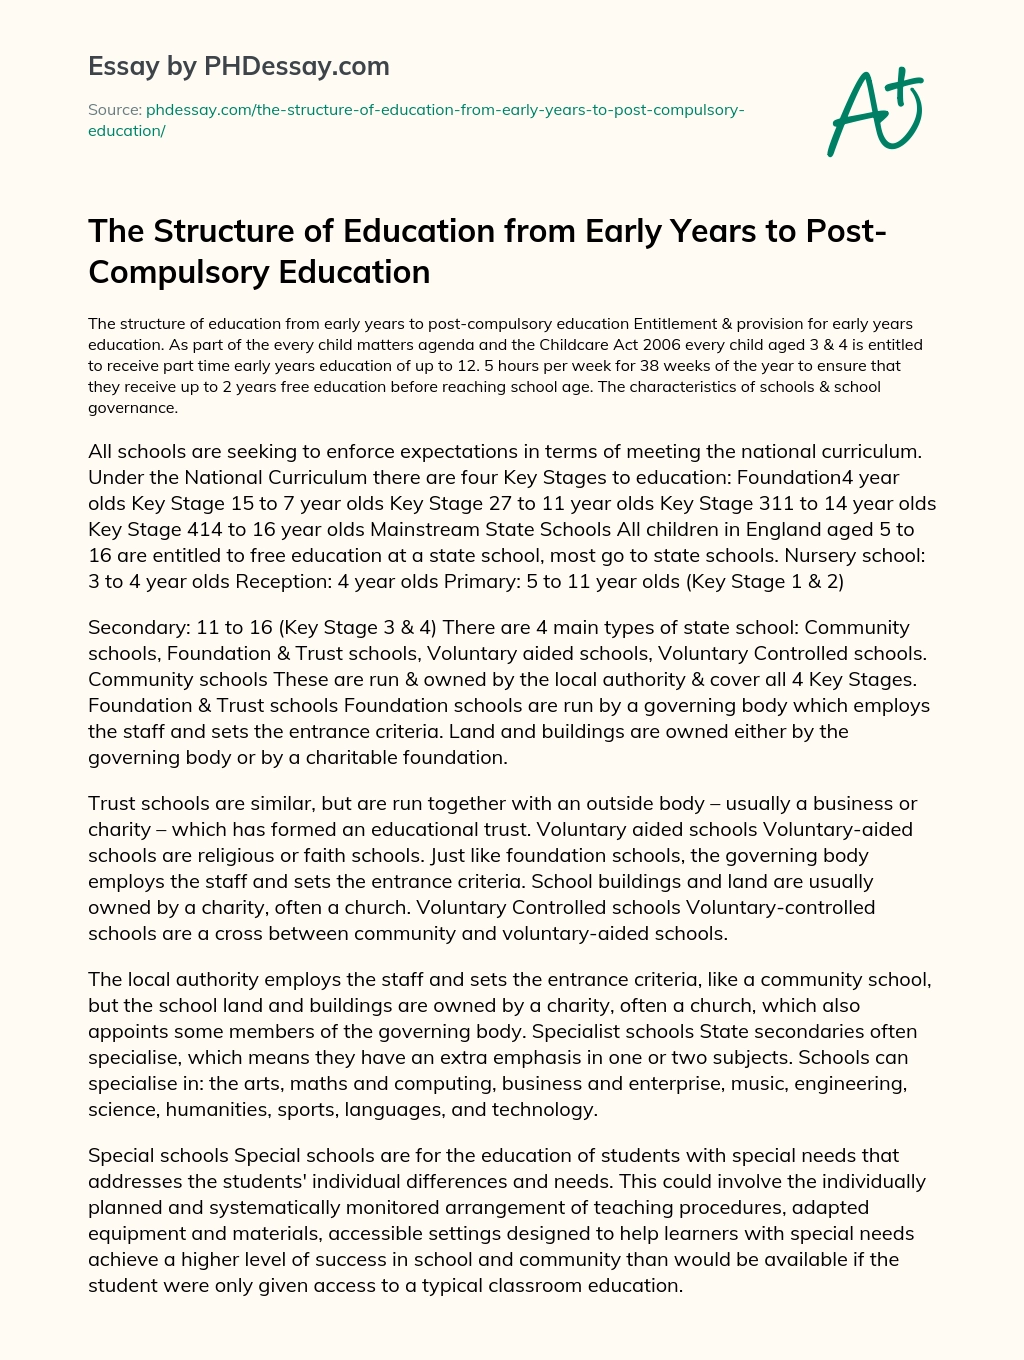 The Structure of Education from Early Years to Post-Compulsory Education essay